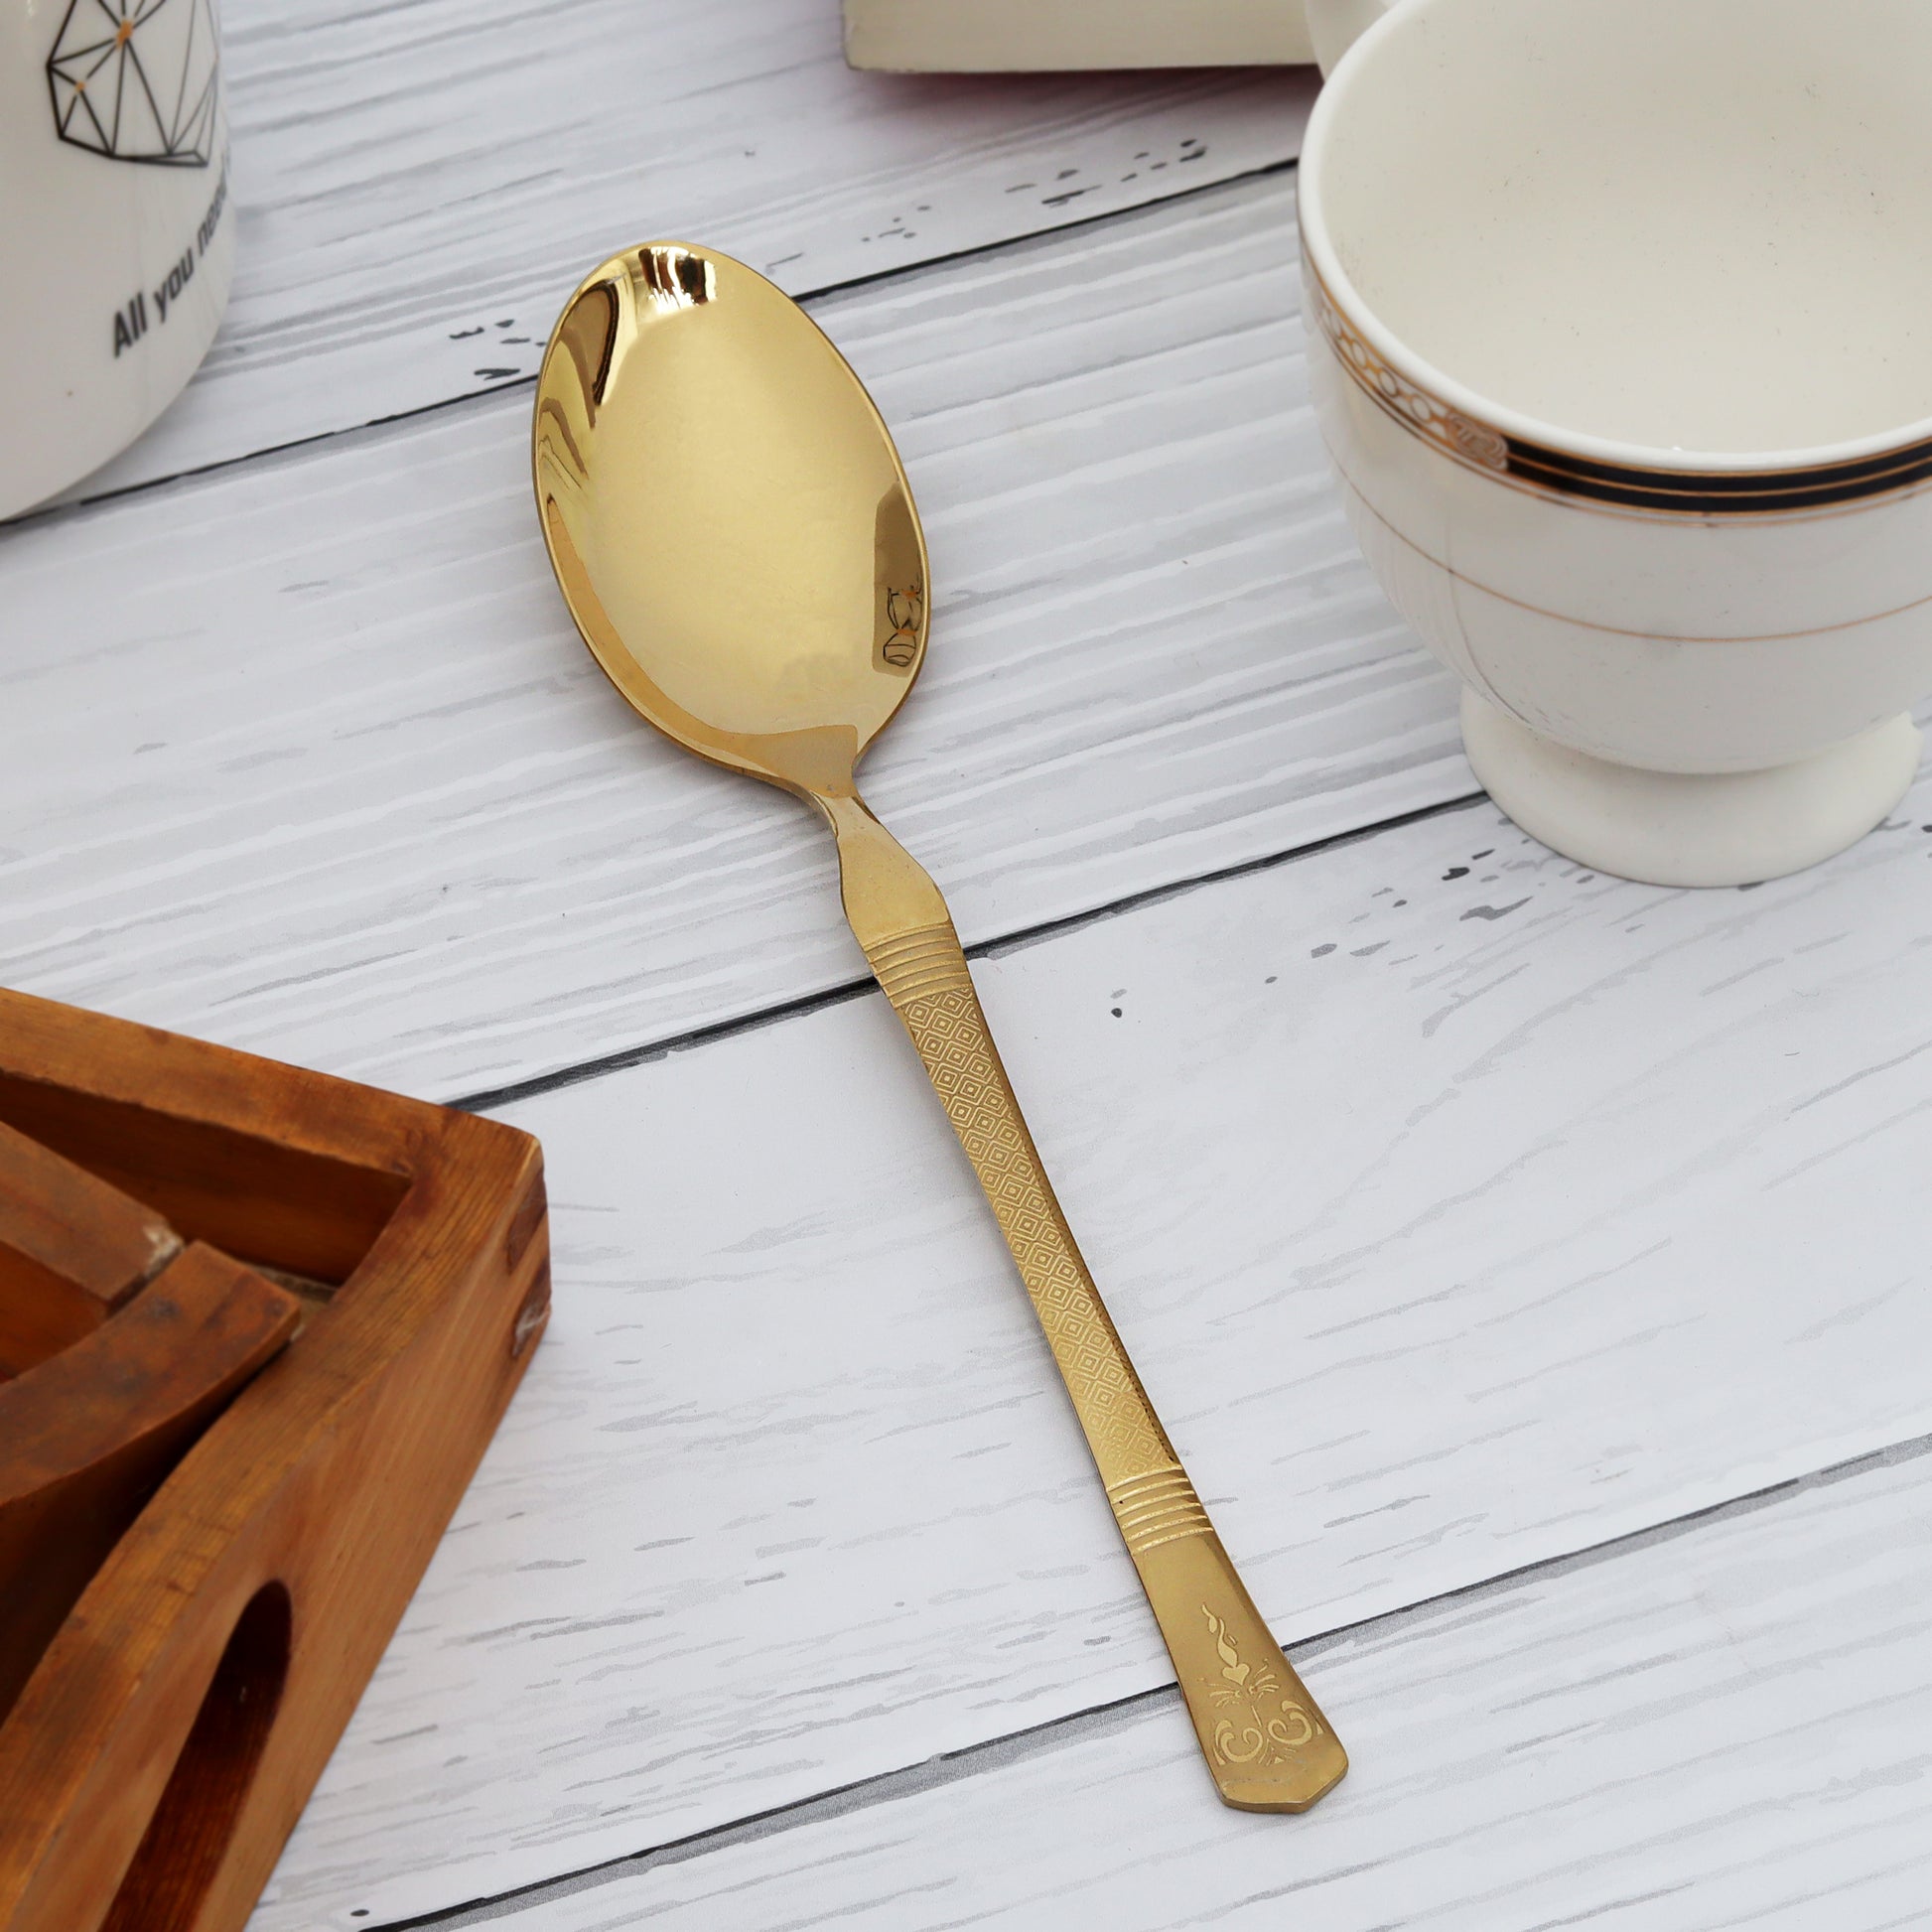 Elegant cutlery table spoon set by Swasha - redefine dining with timeless style